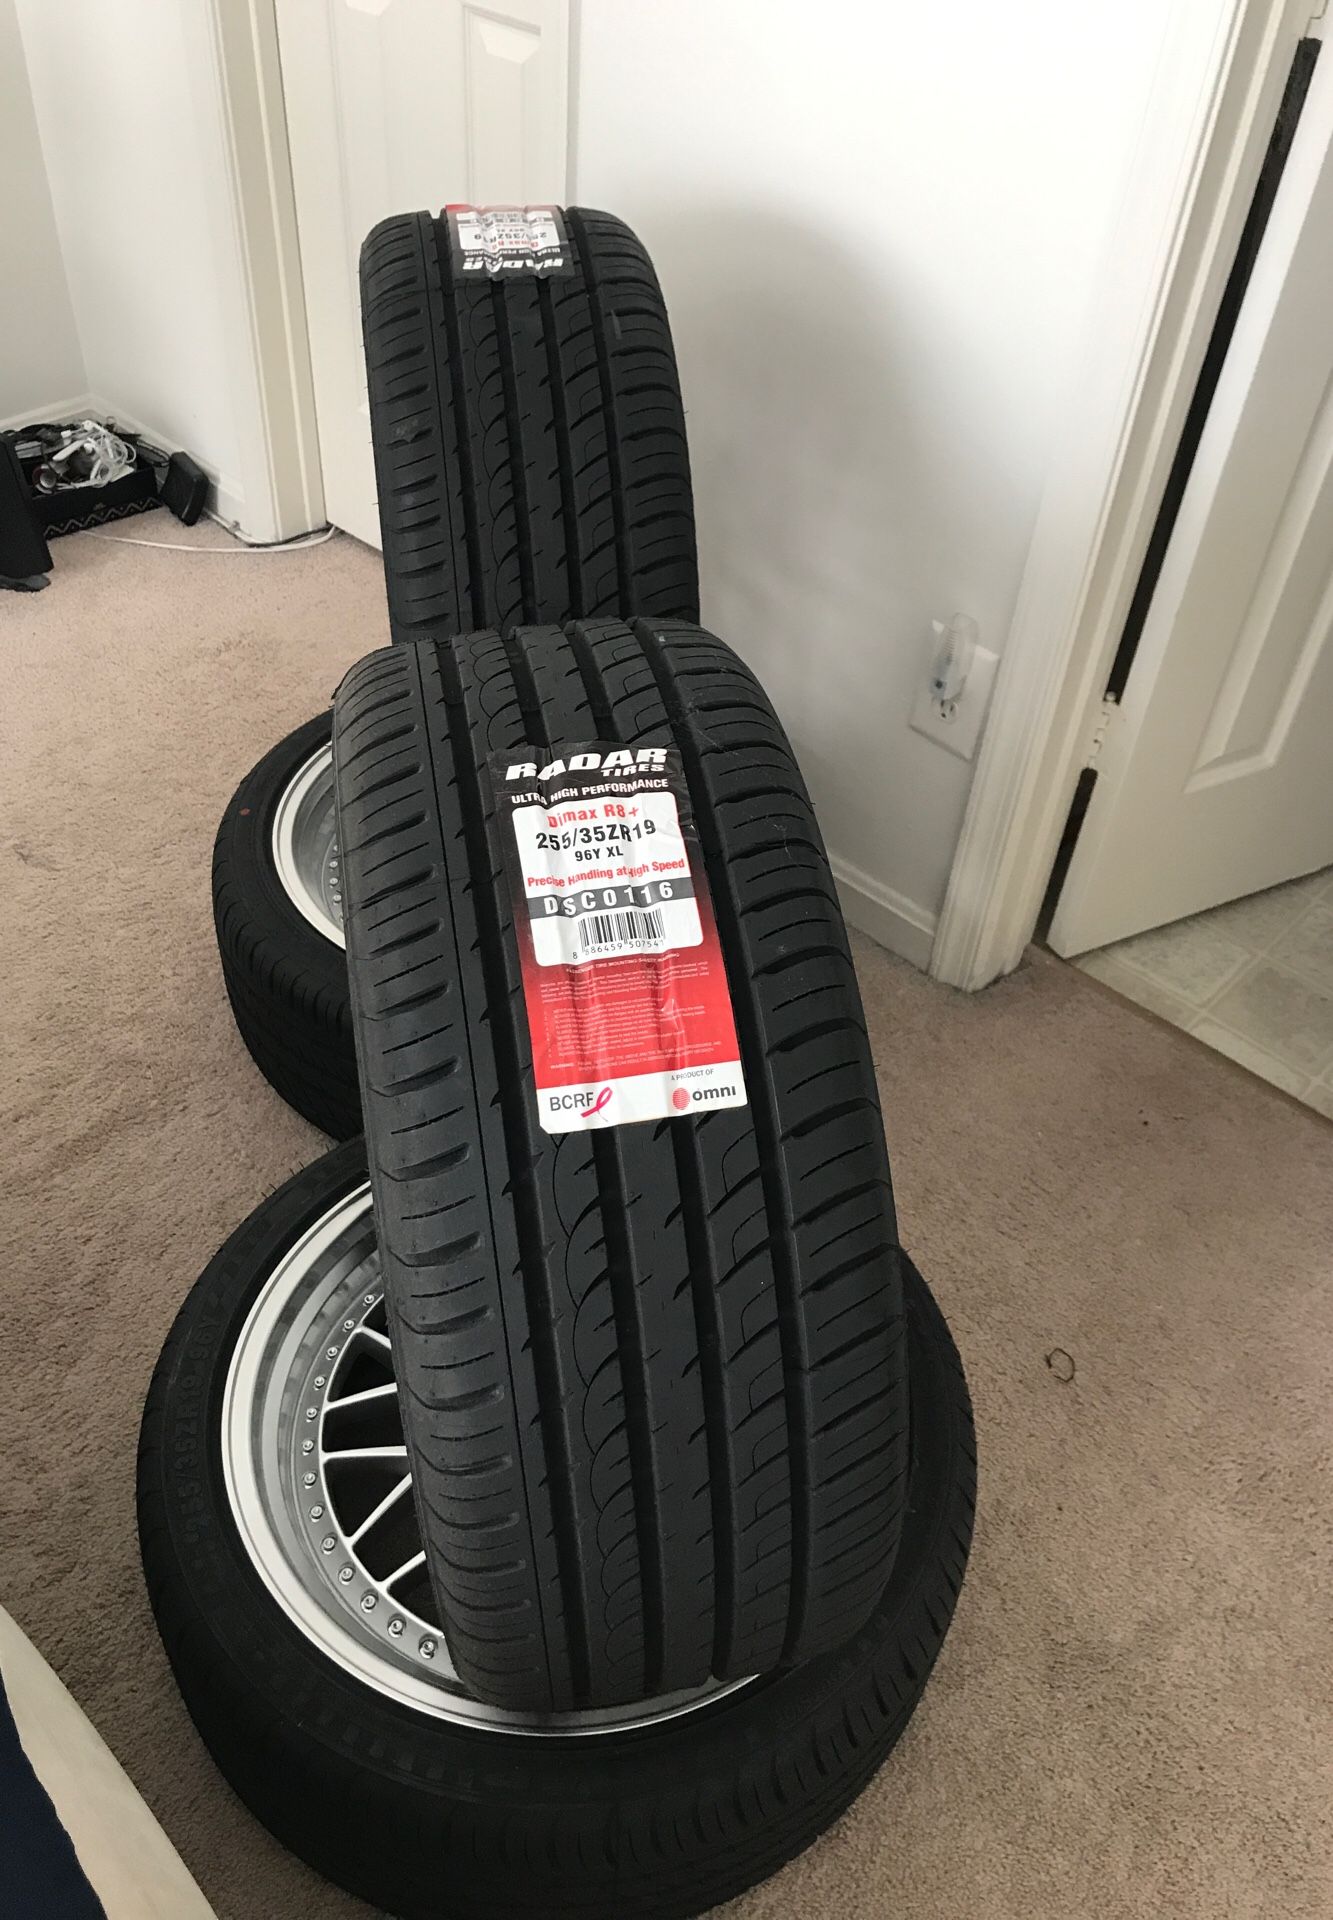 4 brand new tires with ESR Rims and spacers and stems. Size 255-35ZR-19... Star bolt pattern